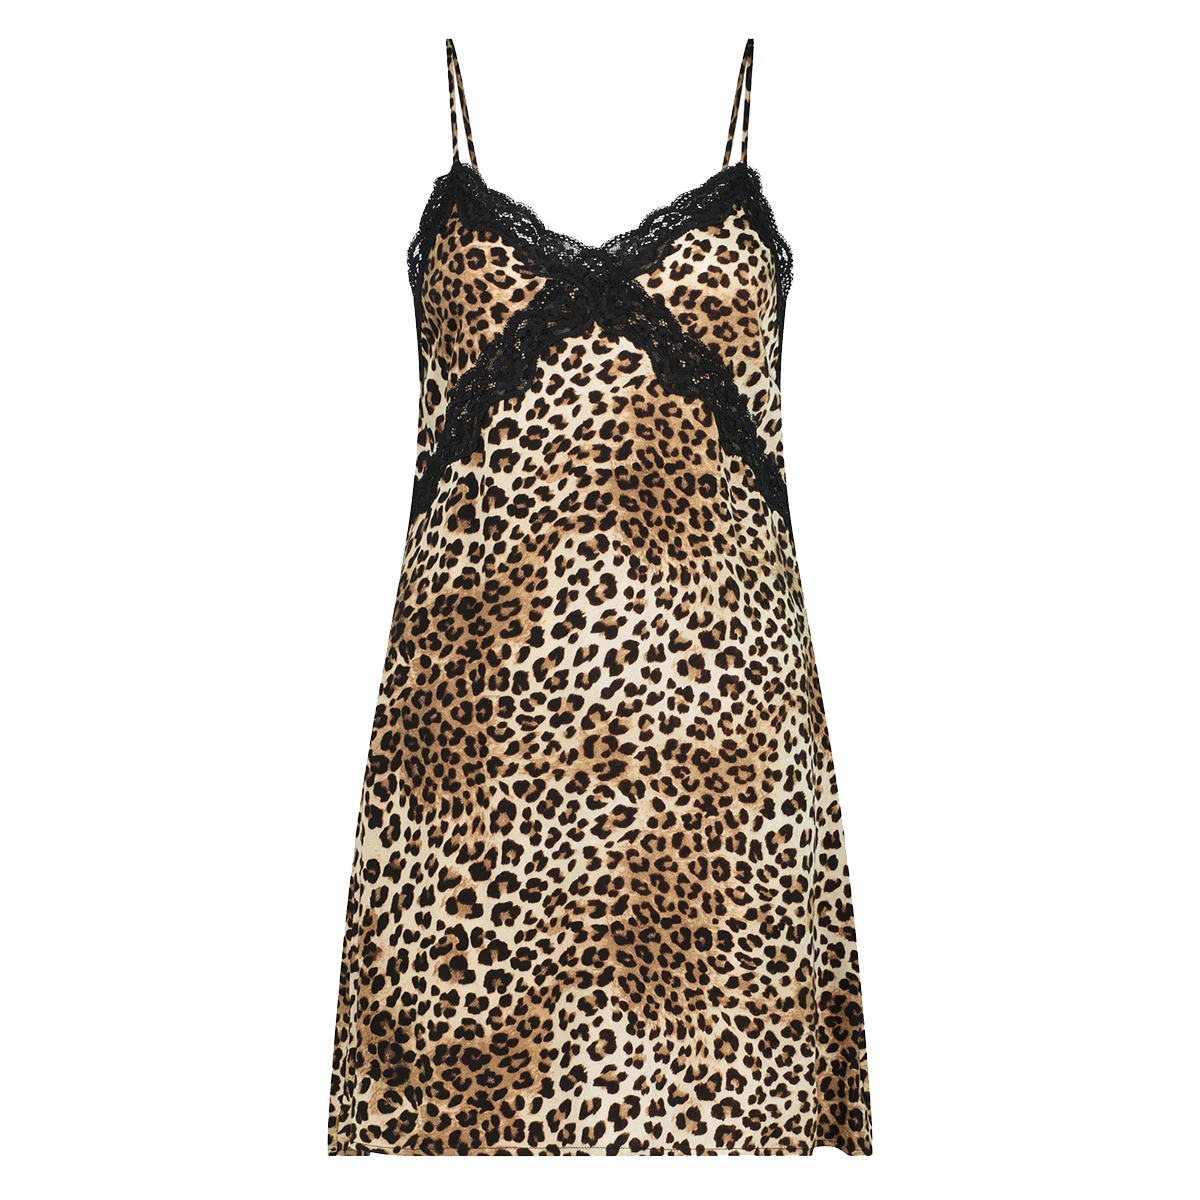 LINGERIE • HUNKEMÖLLER LACE LEOPARD NIGHTGOWN 203167 • Price €22.39